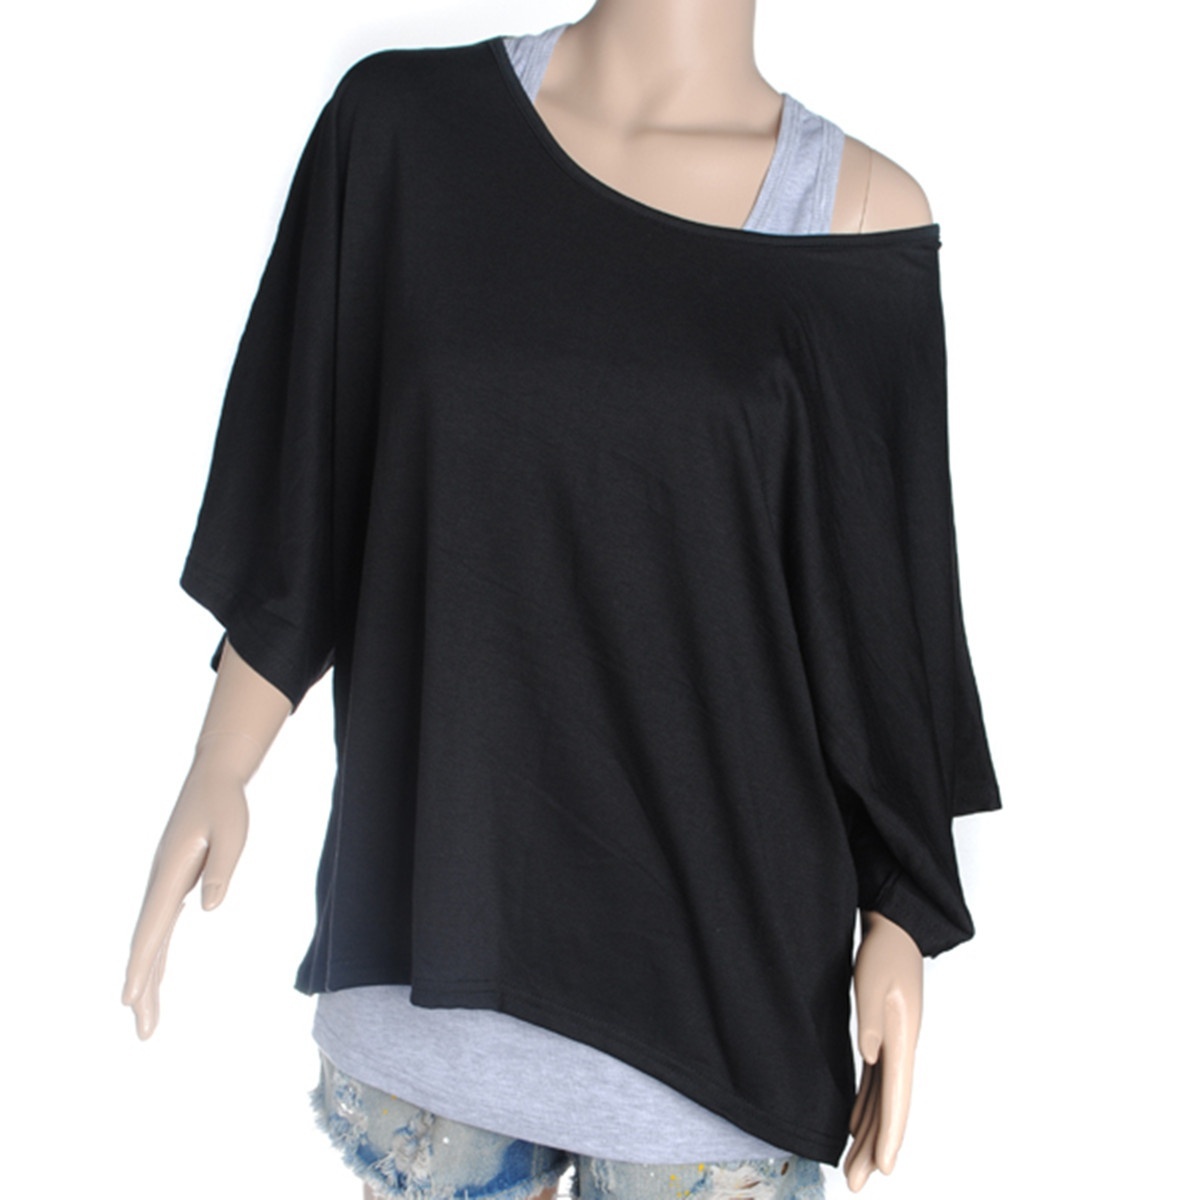 Fashion Women Sexy Loose Top Casual Batwing Sleeve Dolman Blouse T ...